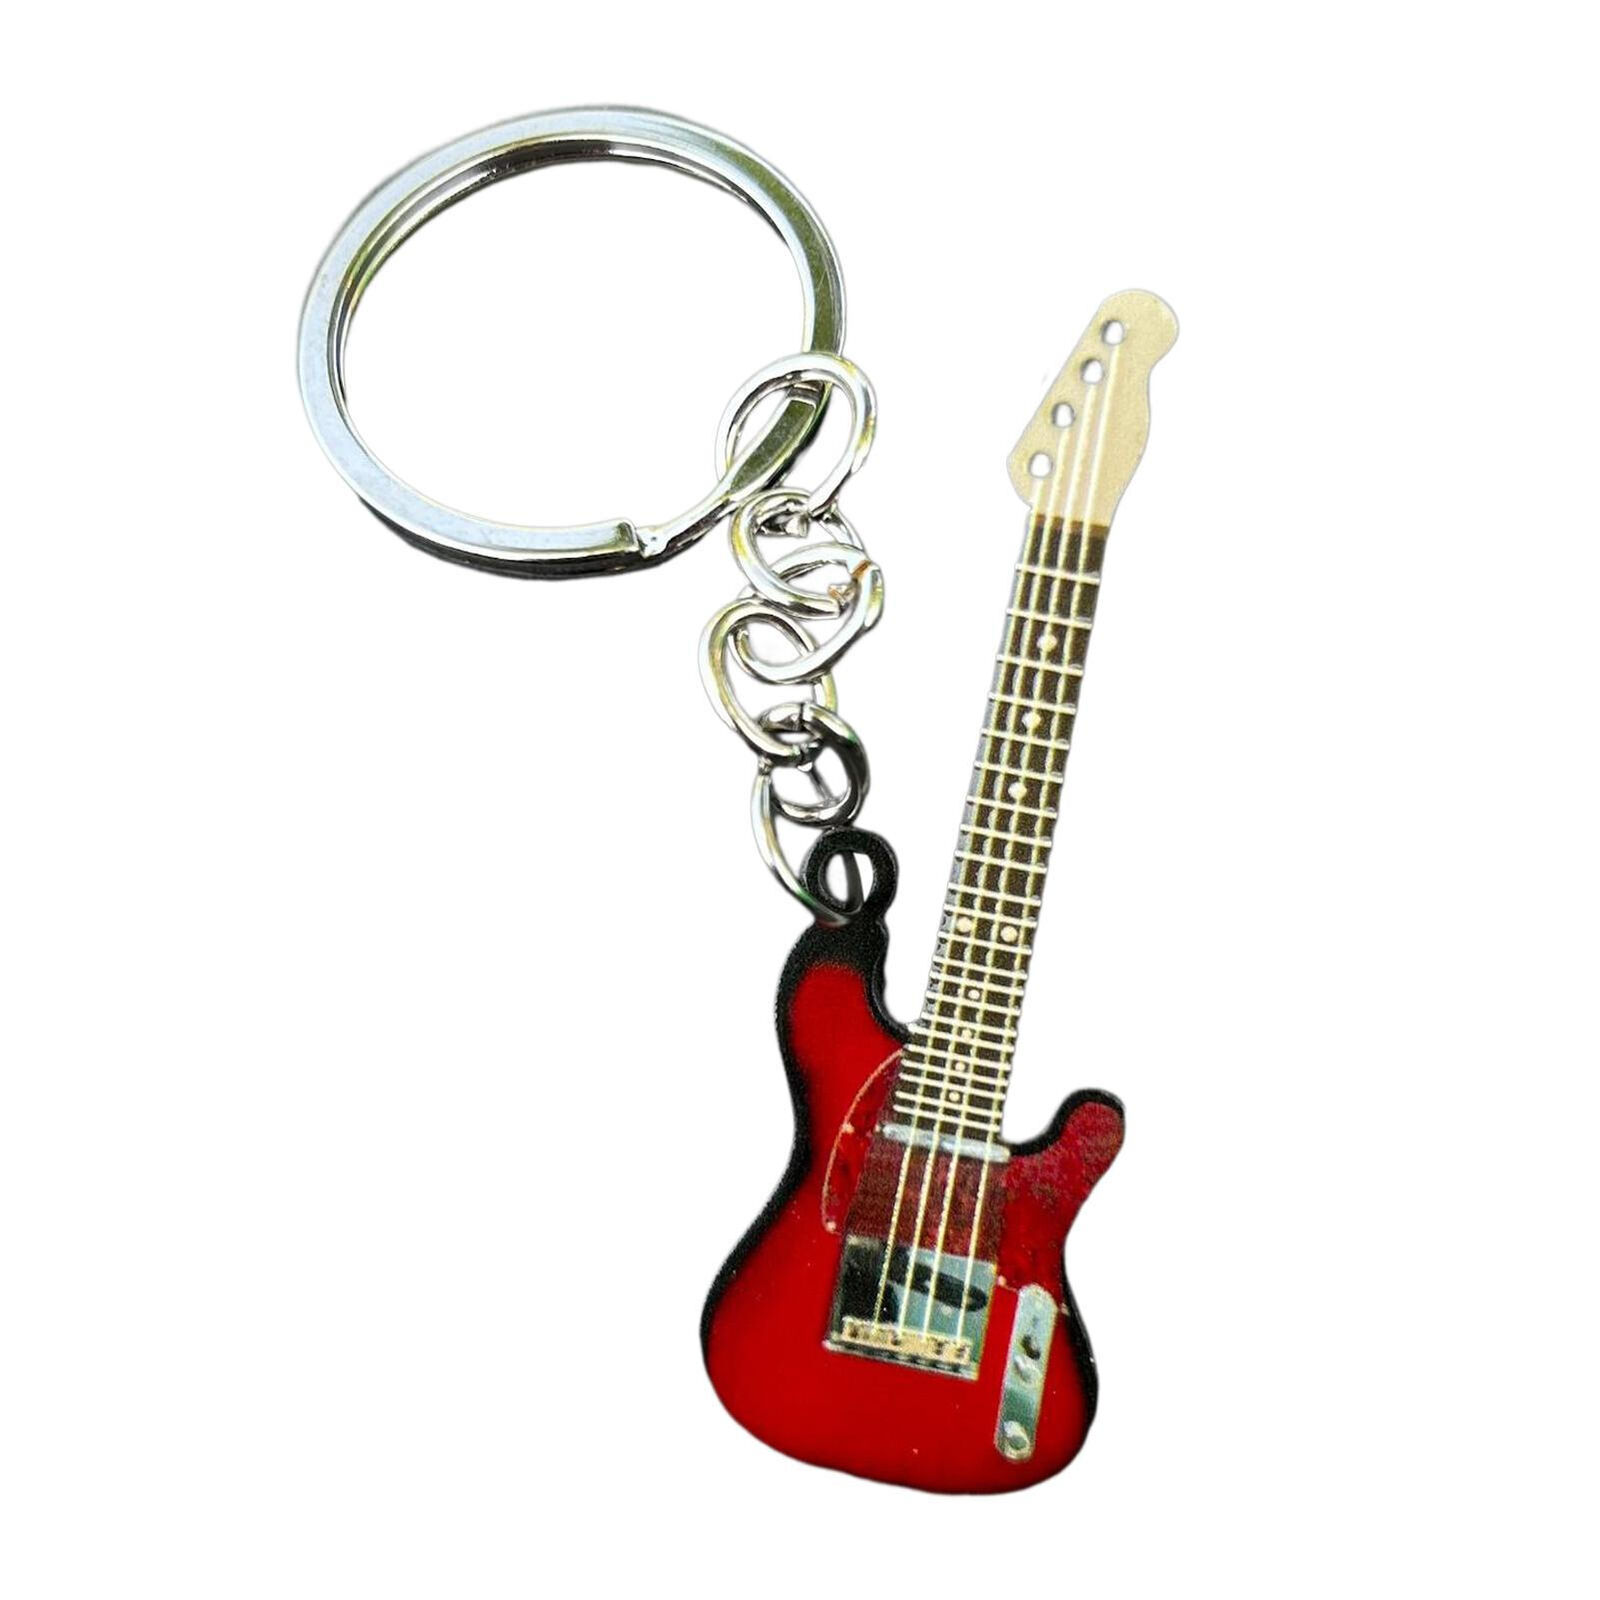 2X Key Chain Guitar Stainless Steel Backpack Decoration Guitar Key Pendant Gifts